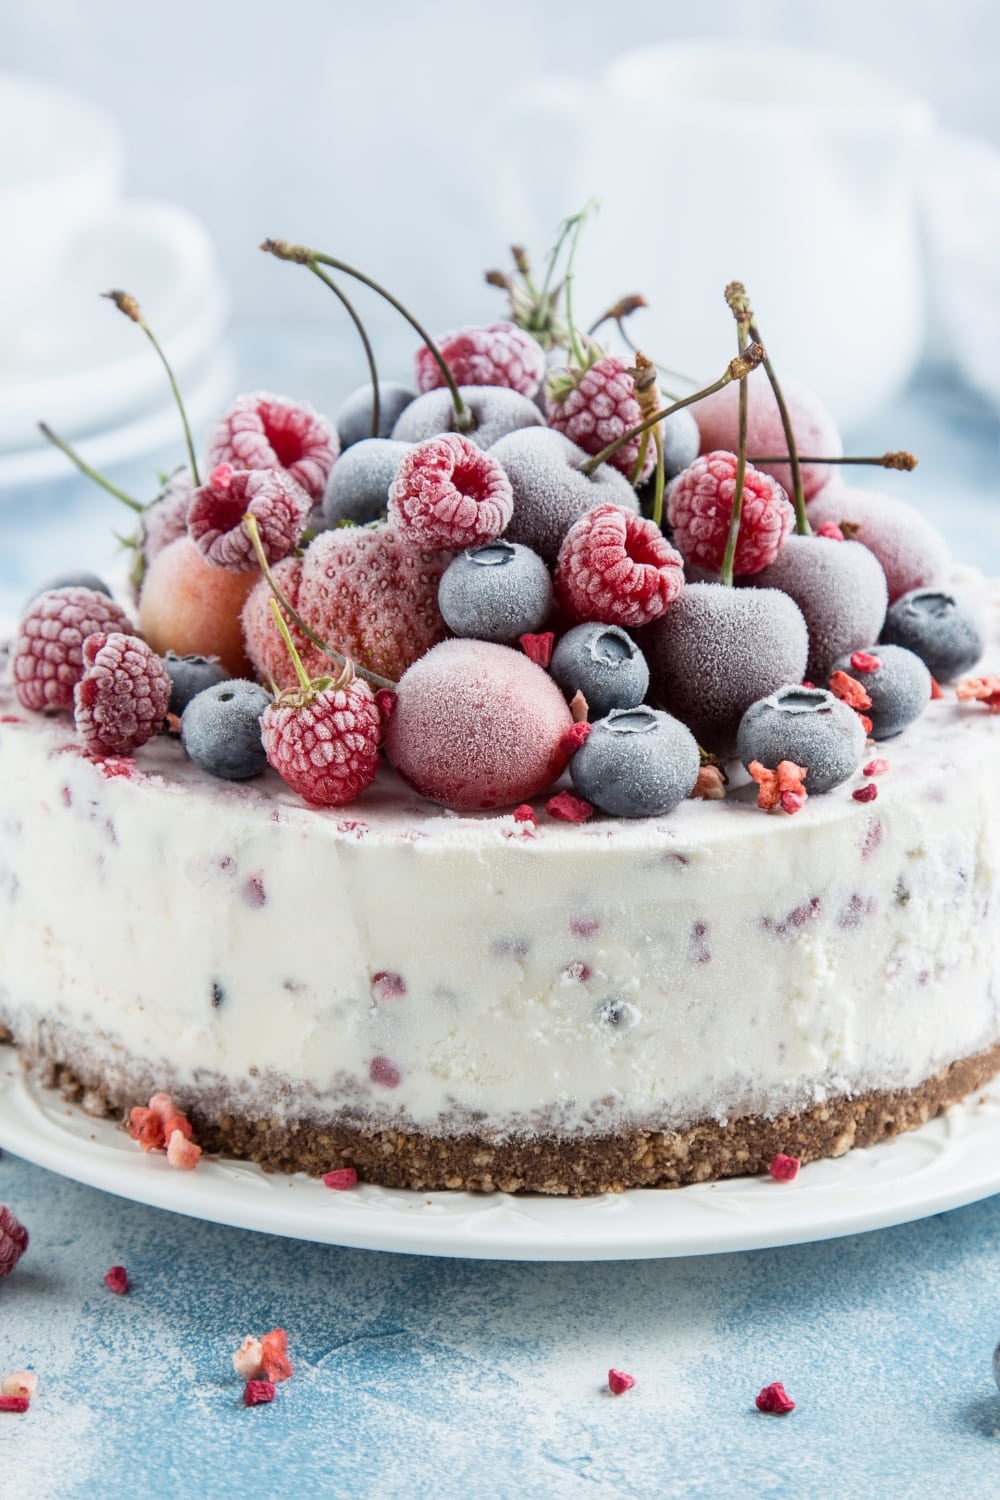 Sweet Cold Ice Cream Cake Topped with Frozen Fresh Berries, Served on a Pristine White Plate